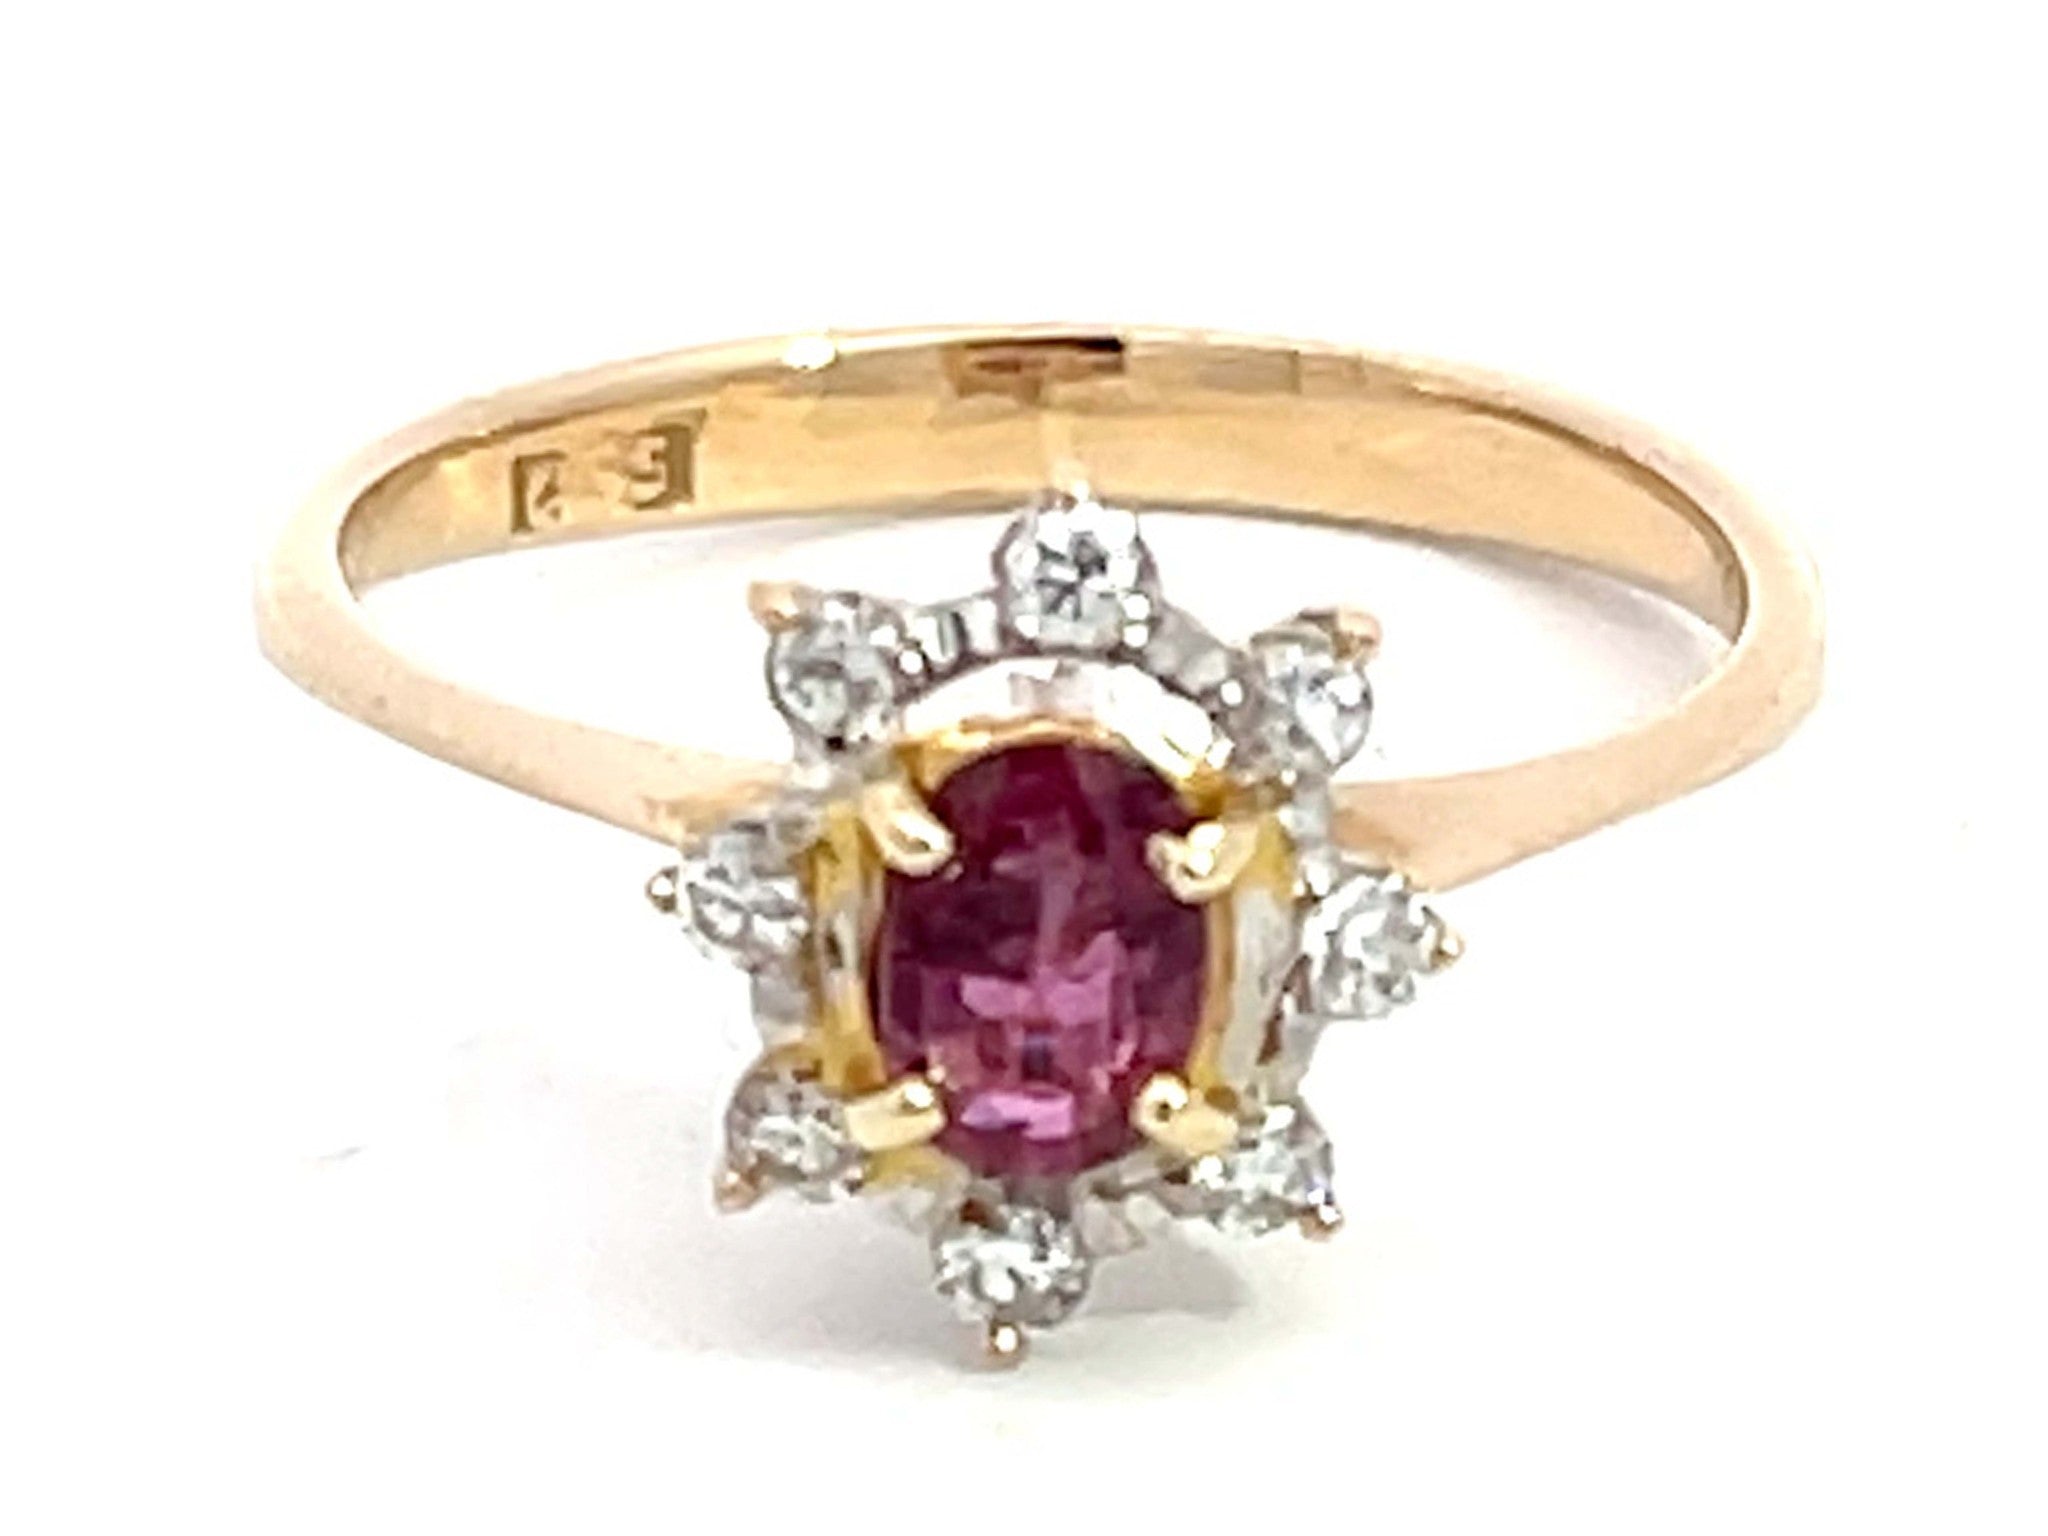 Oval Ruby and Diamond Halo Ring in 14k Yellow Gold